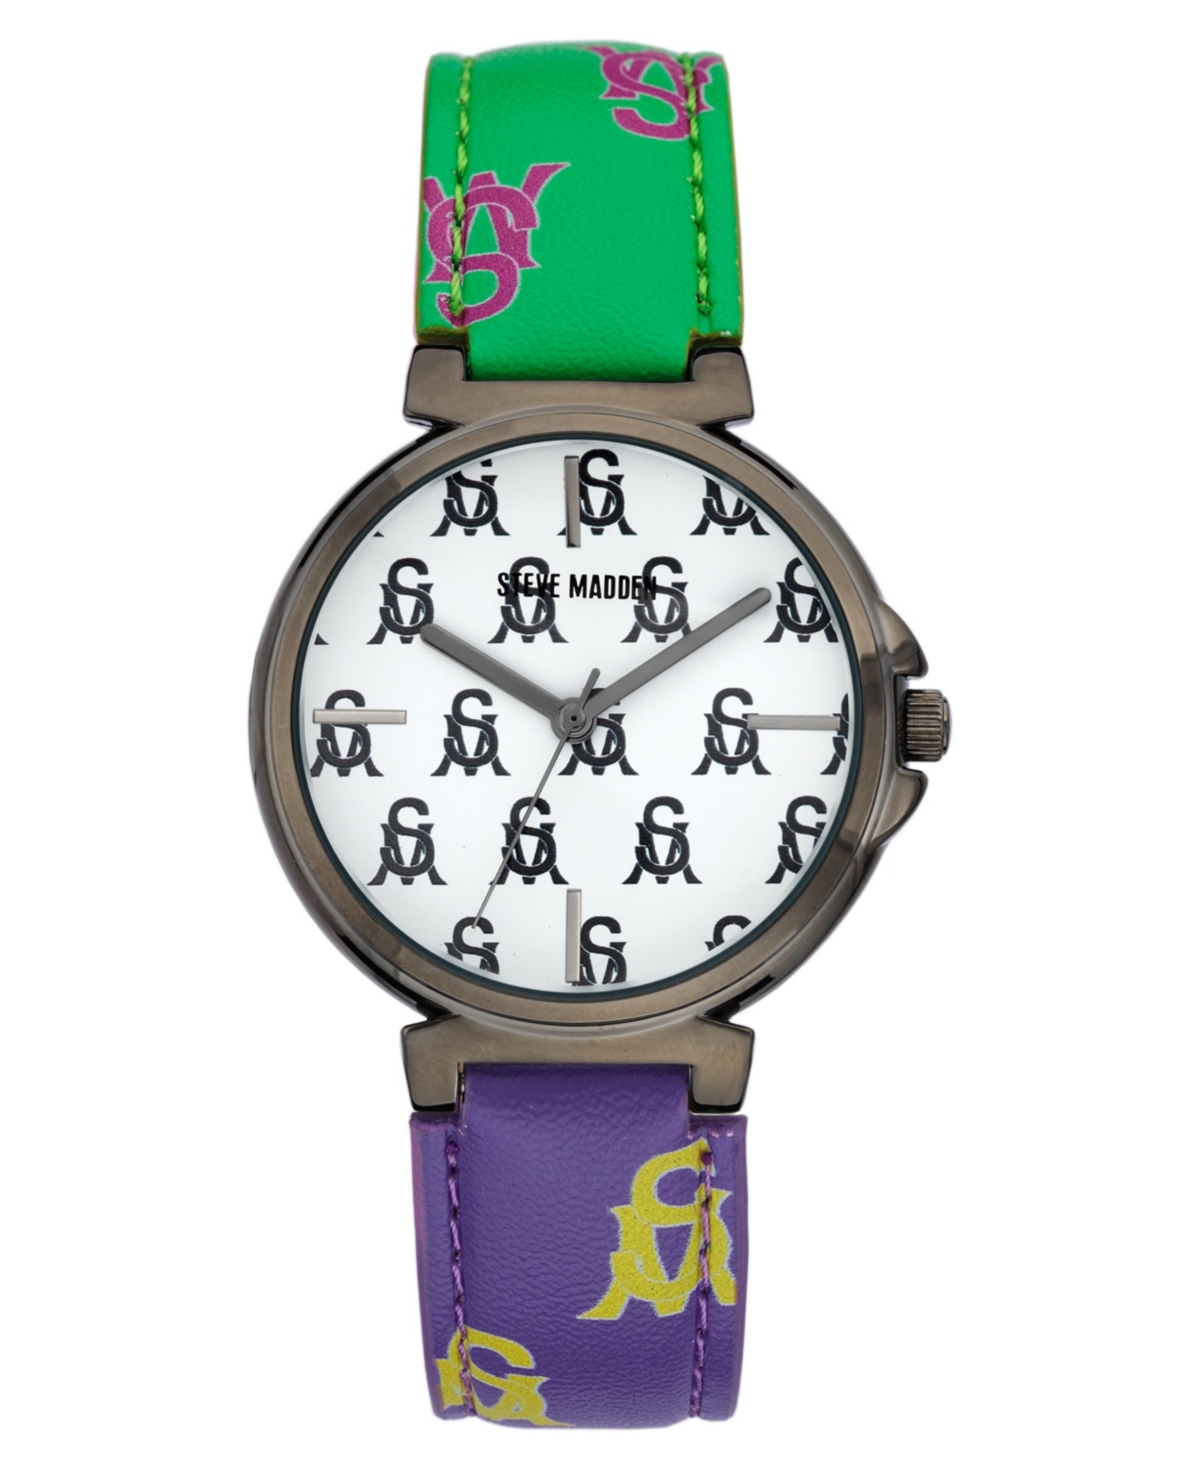 Women's Multi Colored- Green, Purple, Pink, Yellow Polyurethane Leather with Steve Madden Logo and Stitching Watch, 36mm - Green, Purple,